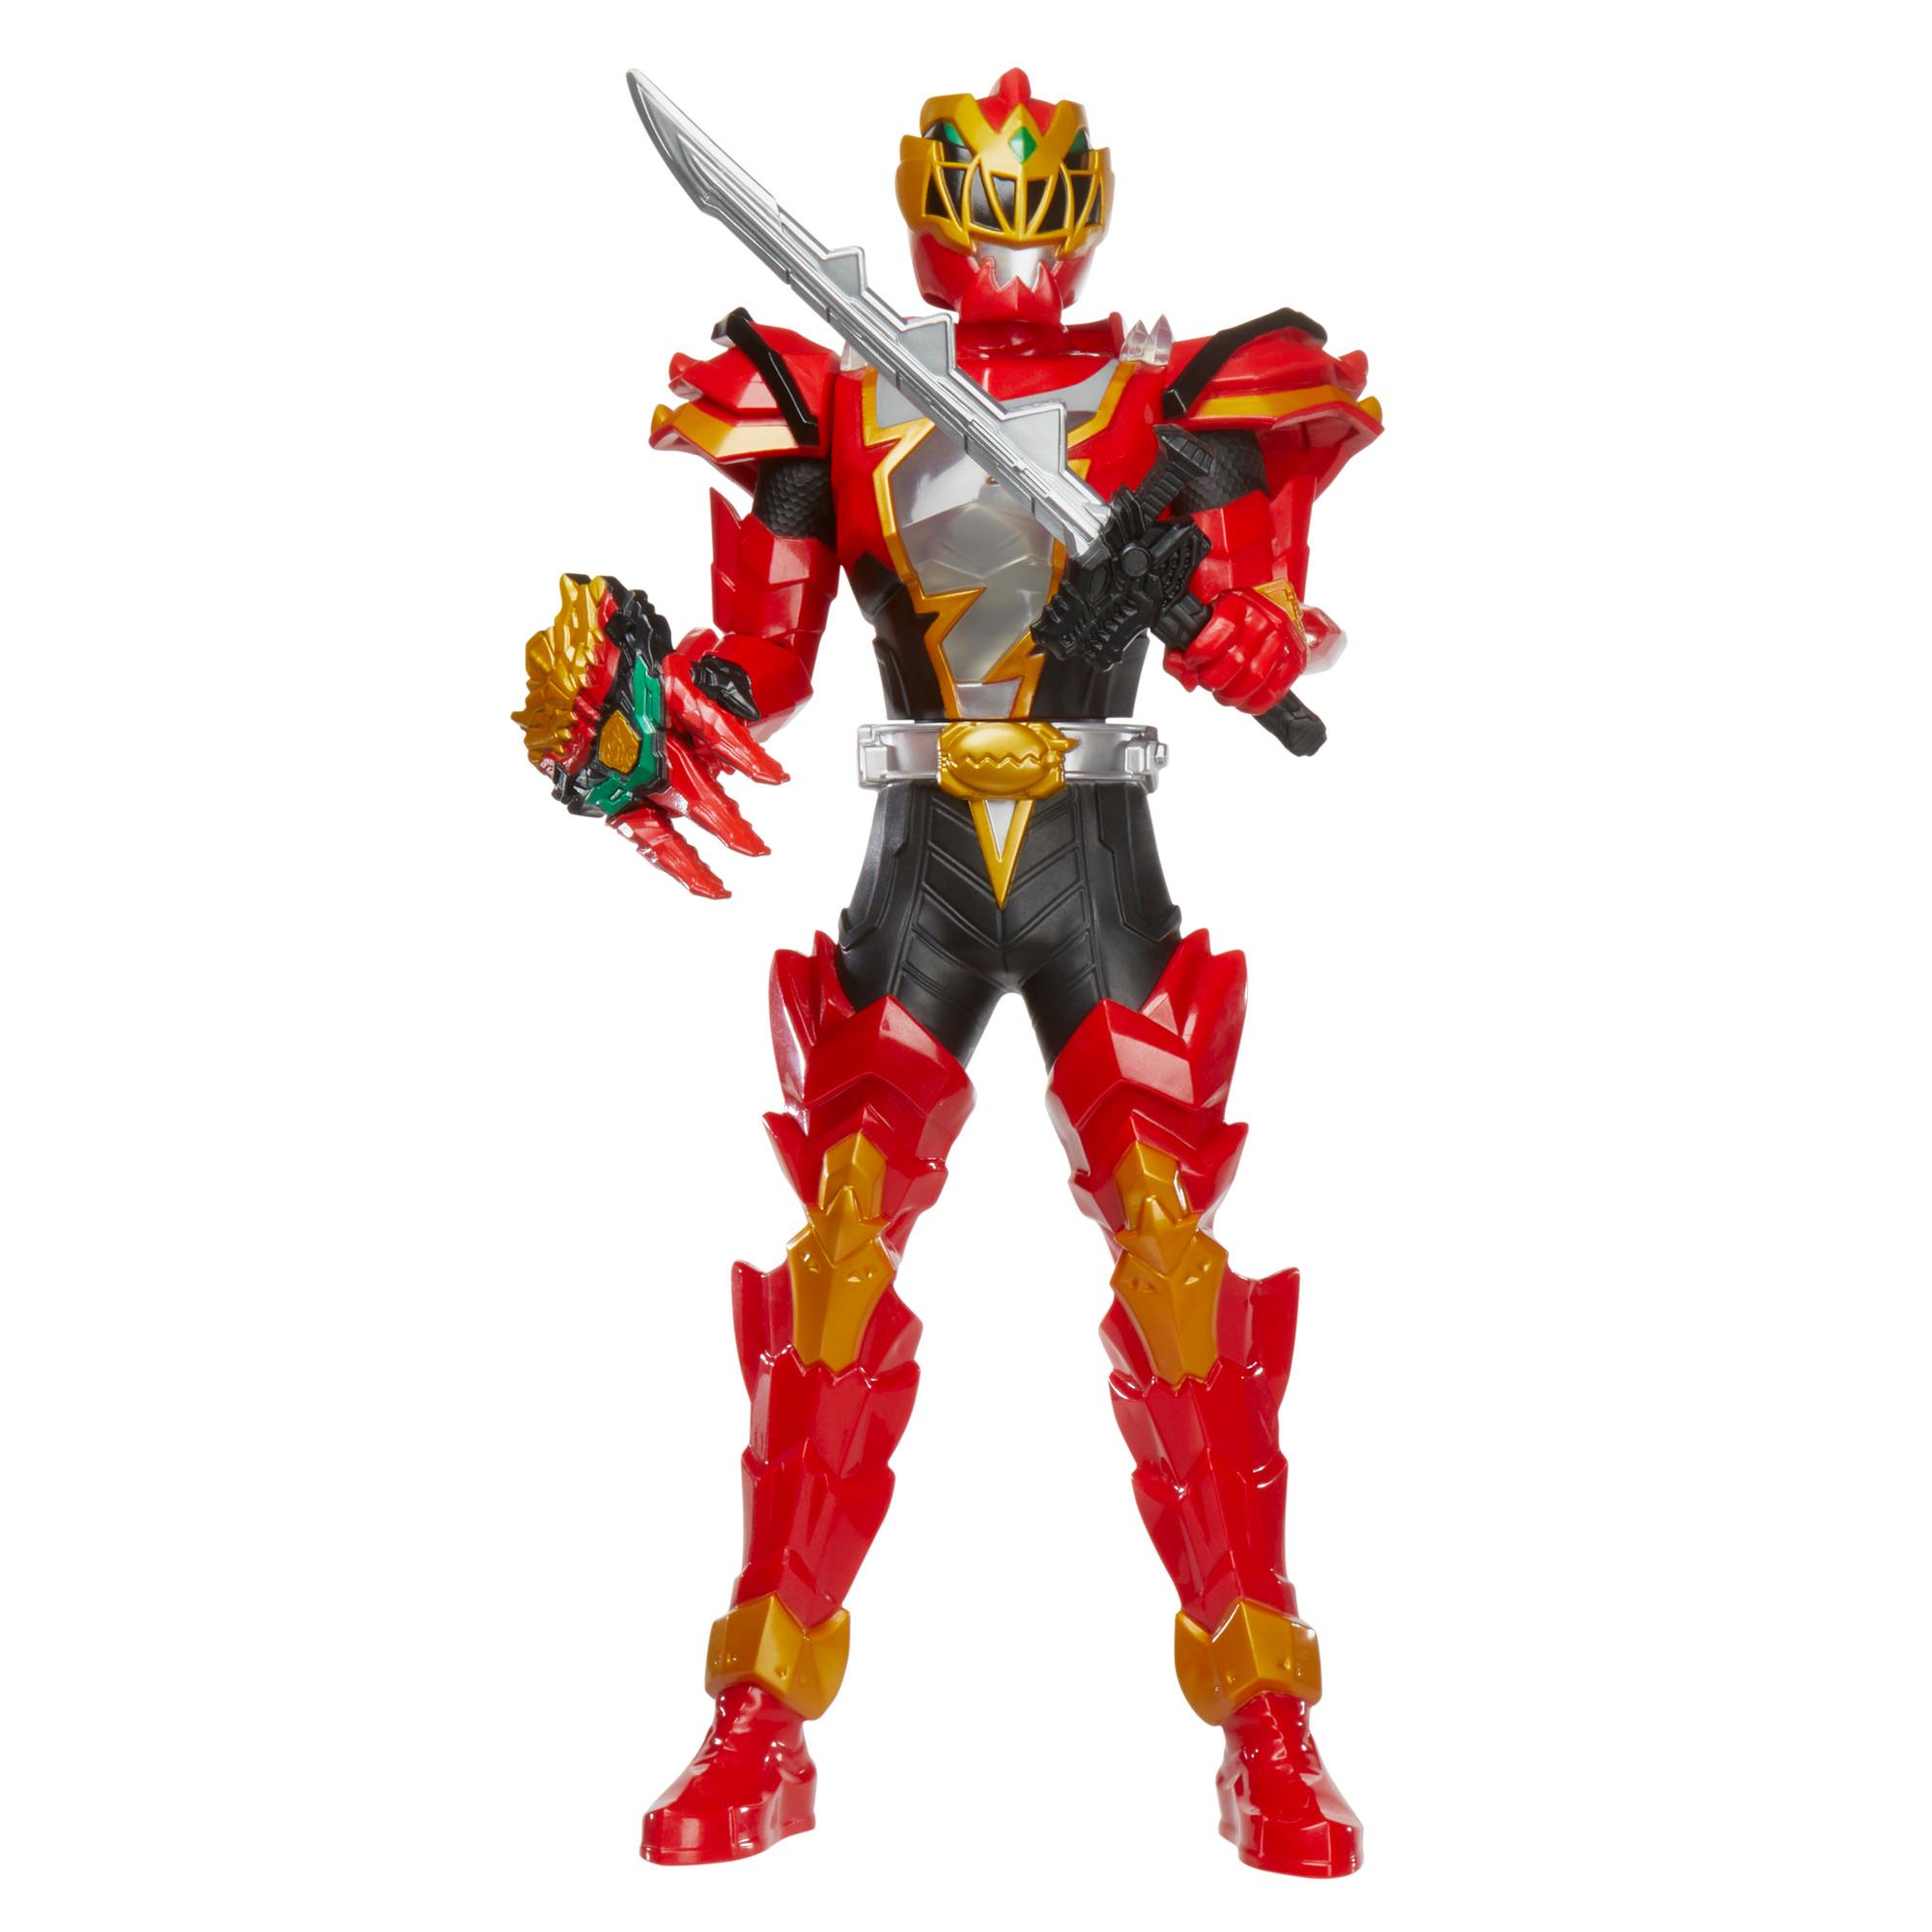 Power Rangers Dino Fury Spiral Strike Red Ranger 12-inch Scale Electronic Action Figure Toy, Ages 4 and Up, Includes 2 Accessories